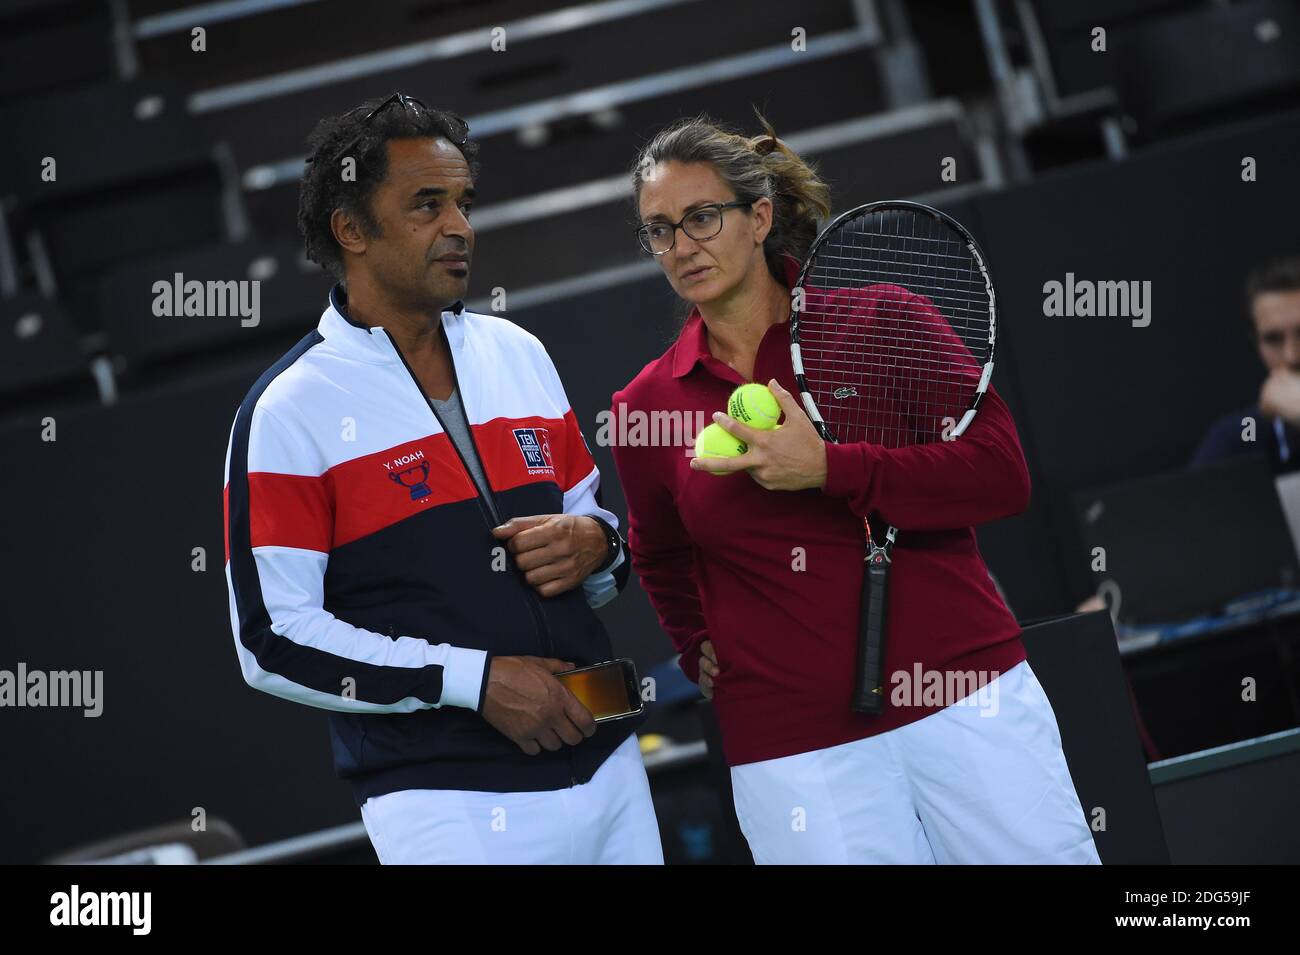 French Fed Cup captain Yannick Noah (FRA) with Mary Pierce (FRA) during  practice at the Fed Cup first round tie at Palexpo, Geneva, Suisse on  february the 10, 2017. Photo by Corinne